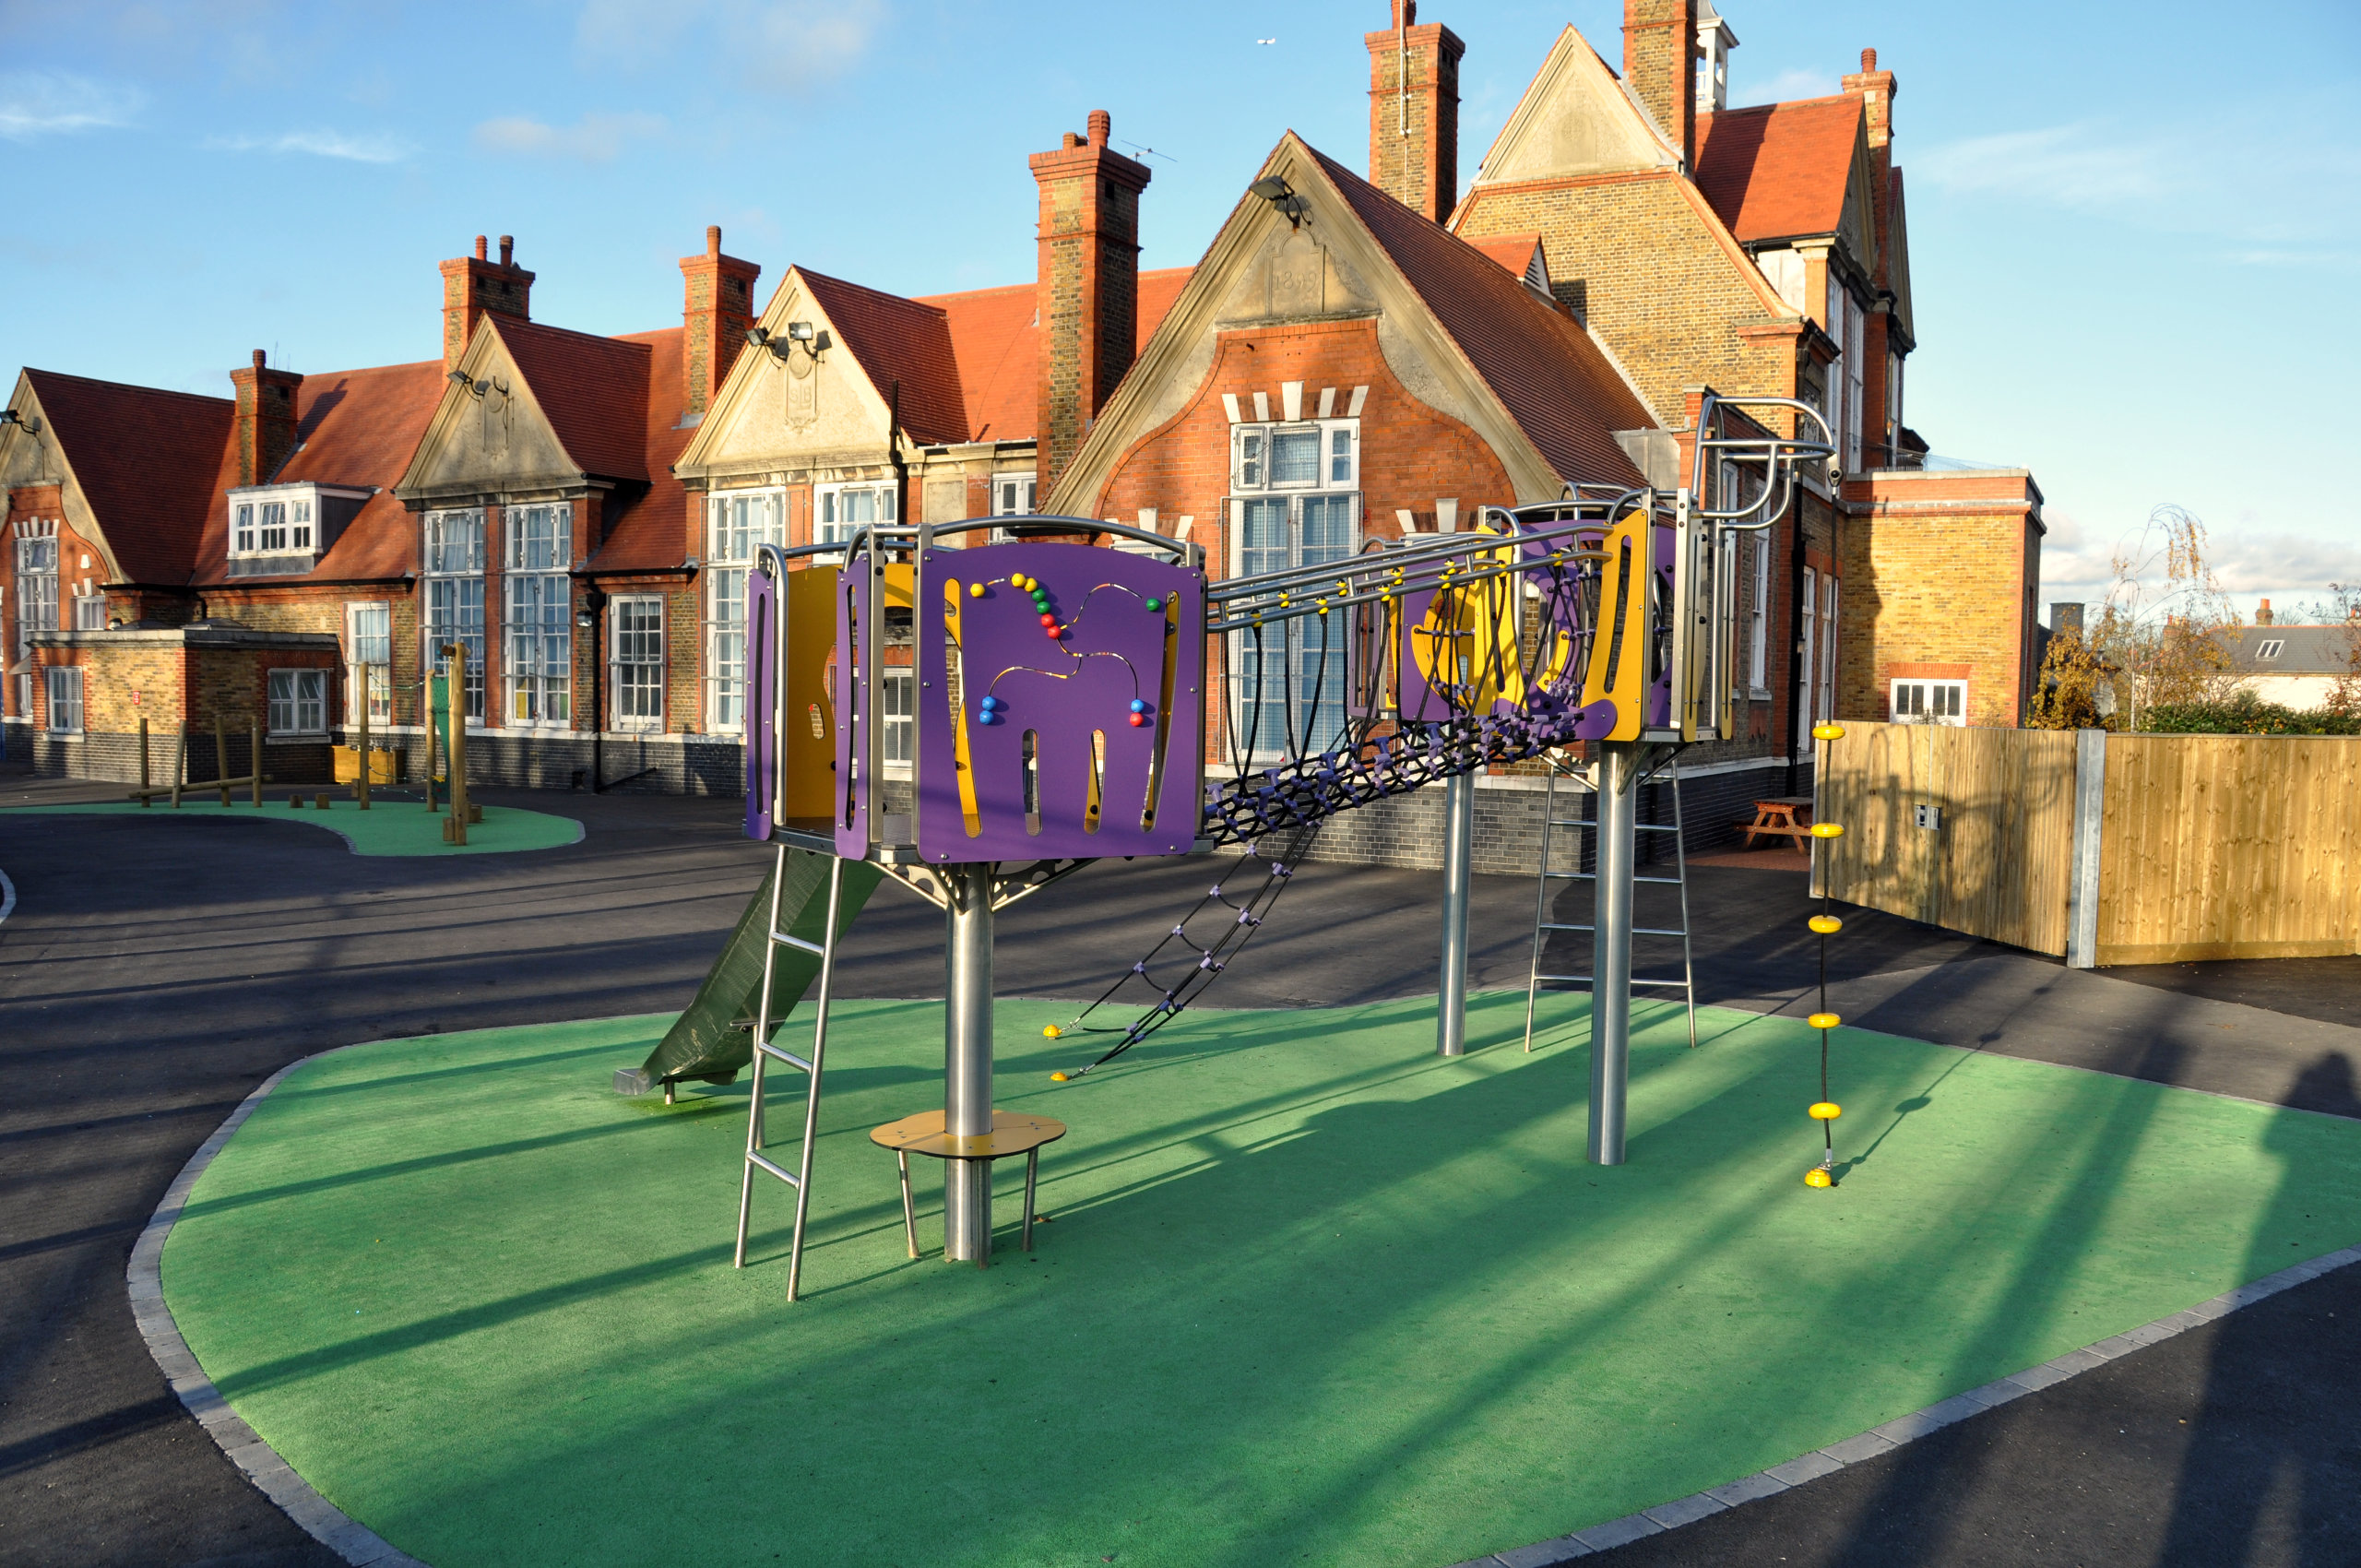 New Playground, Rosendale Primary School, West Dulwich